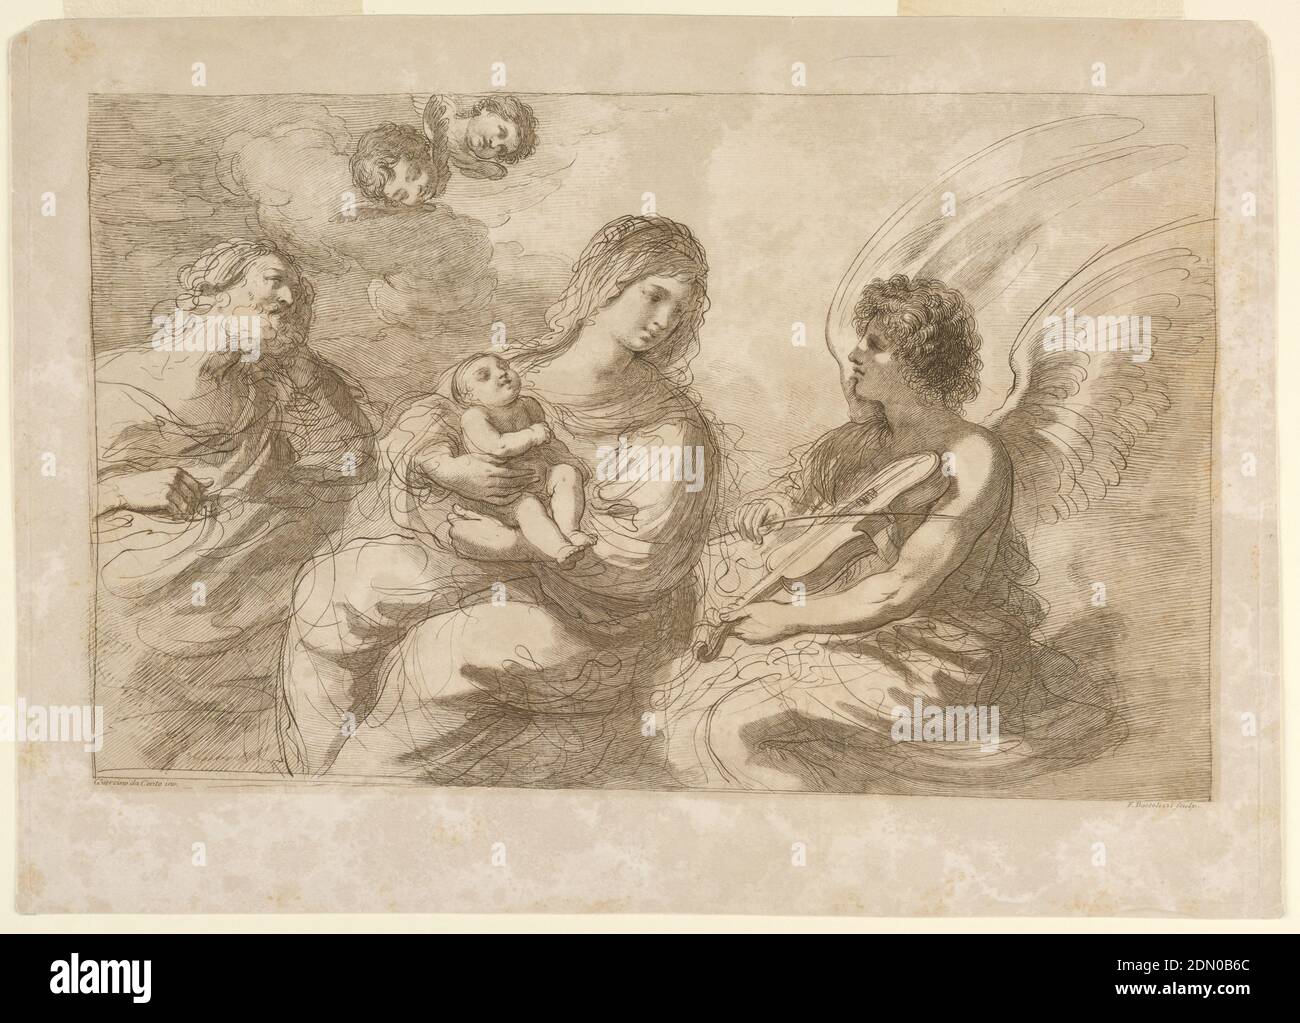 Virgin, Infant, and Joseph with an Angel Playing on a Violin, Francesco Bartolozzi, Italian, active England, 1727–1815, Giovanni Francesco Barbieri (called Guercino), Italian, 1591 – 1666, Engraving in brown ink on paper, The Virgin seated, with the Infant in her arms, watches the Angel to her left, playing the violin. Joseph, left, faces them both. Two putti, upper left, look down. Below, the artists' names., Italy, England, 1760-1770, Print Stock Photo